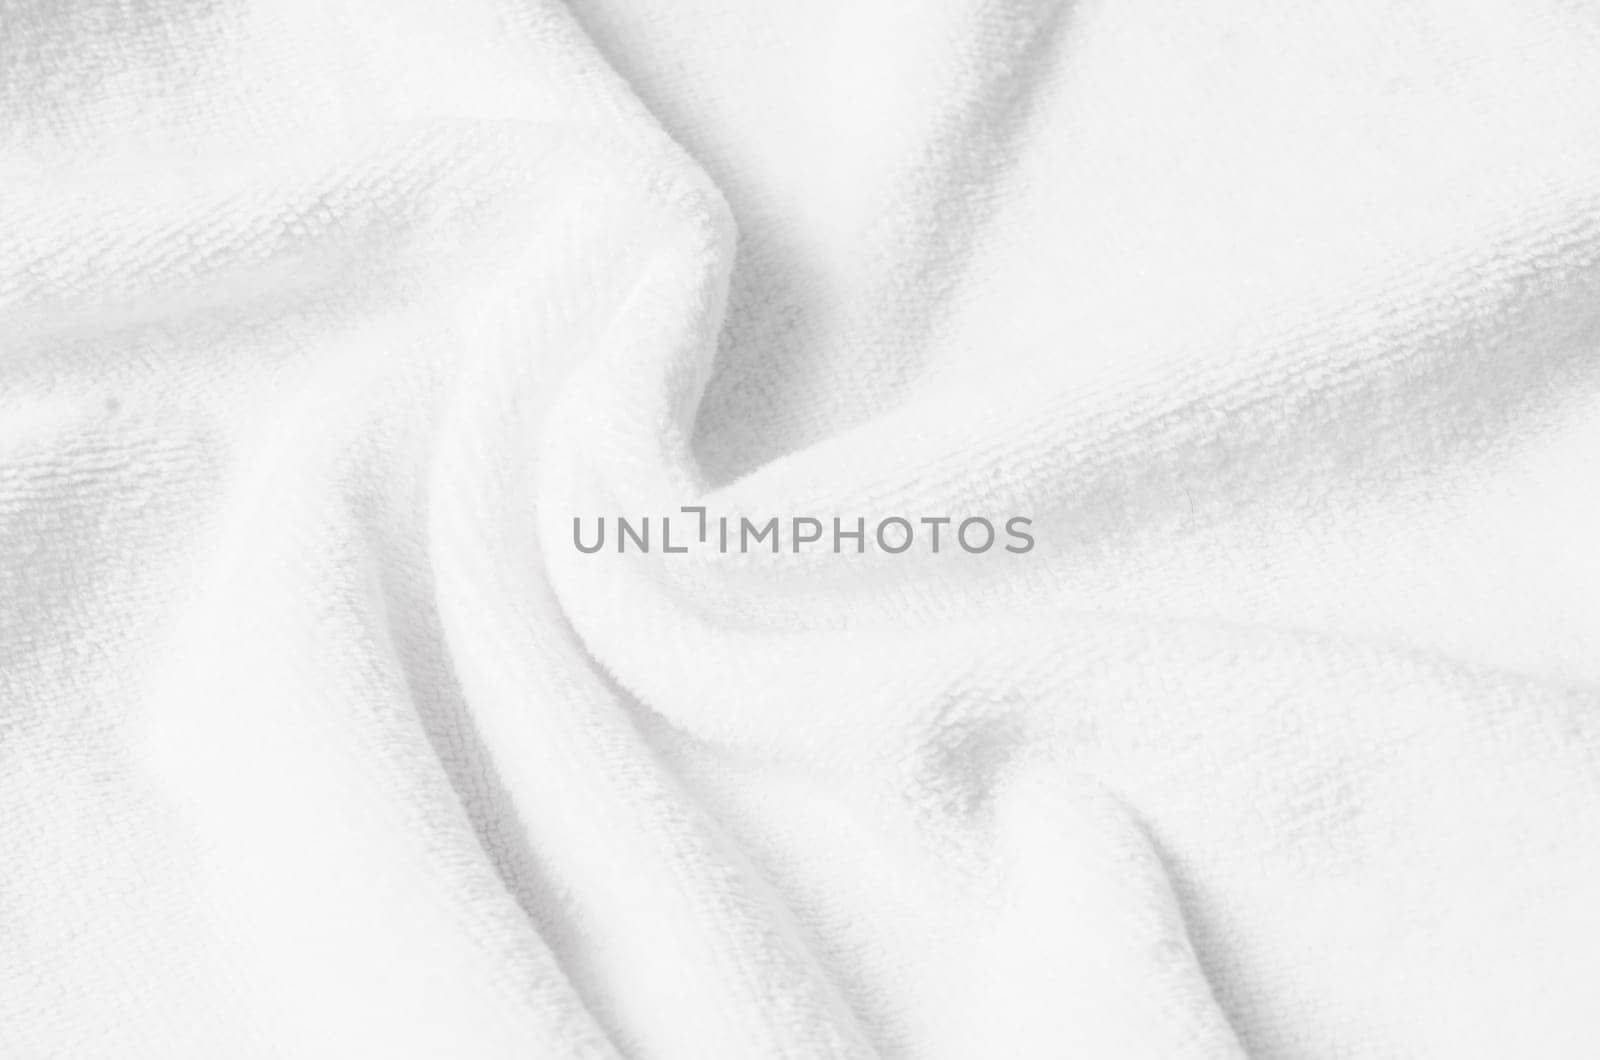 The Terry towel texture, top view of a white bath towel by Gamjai